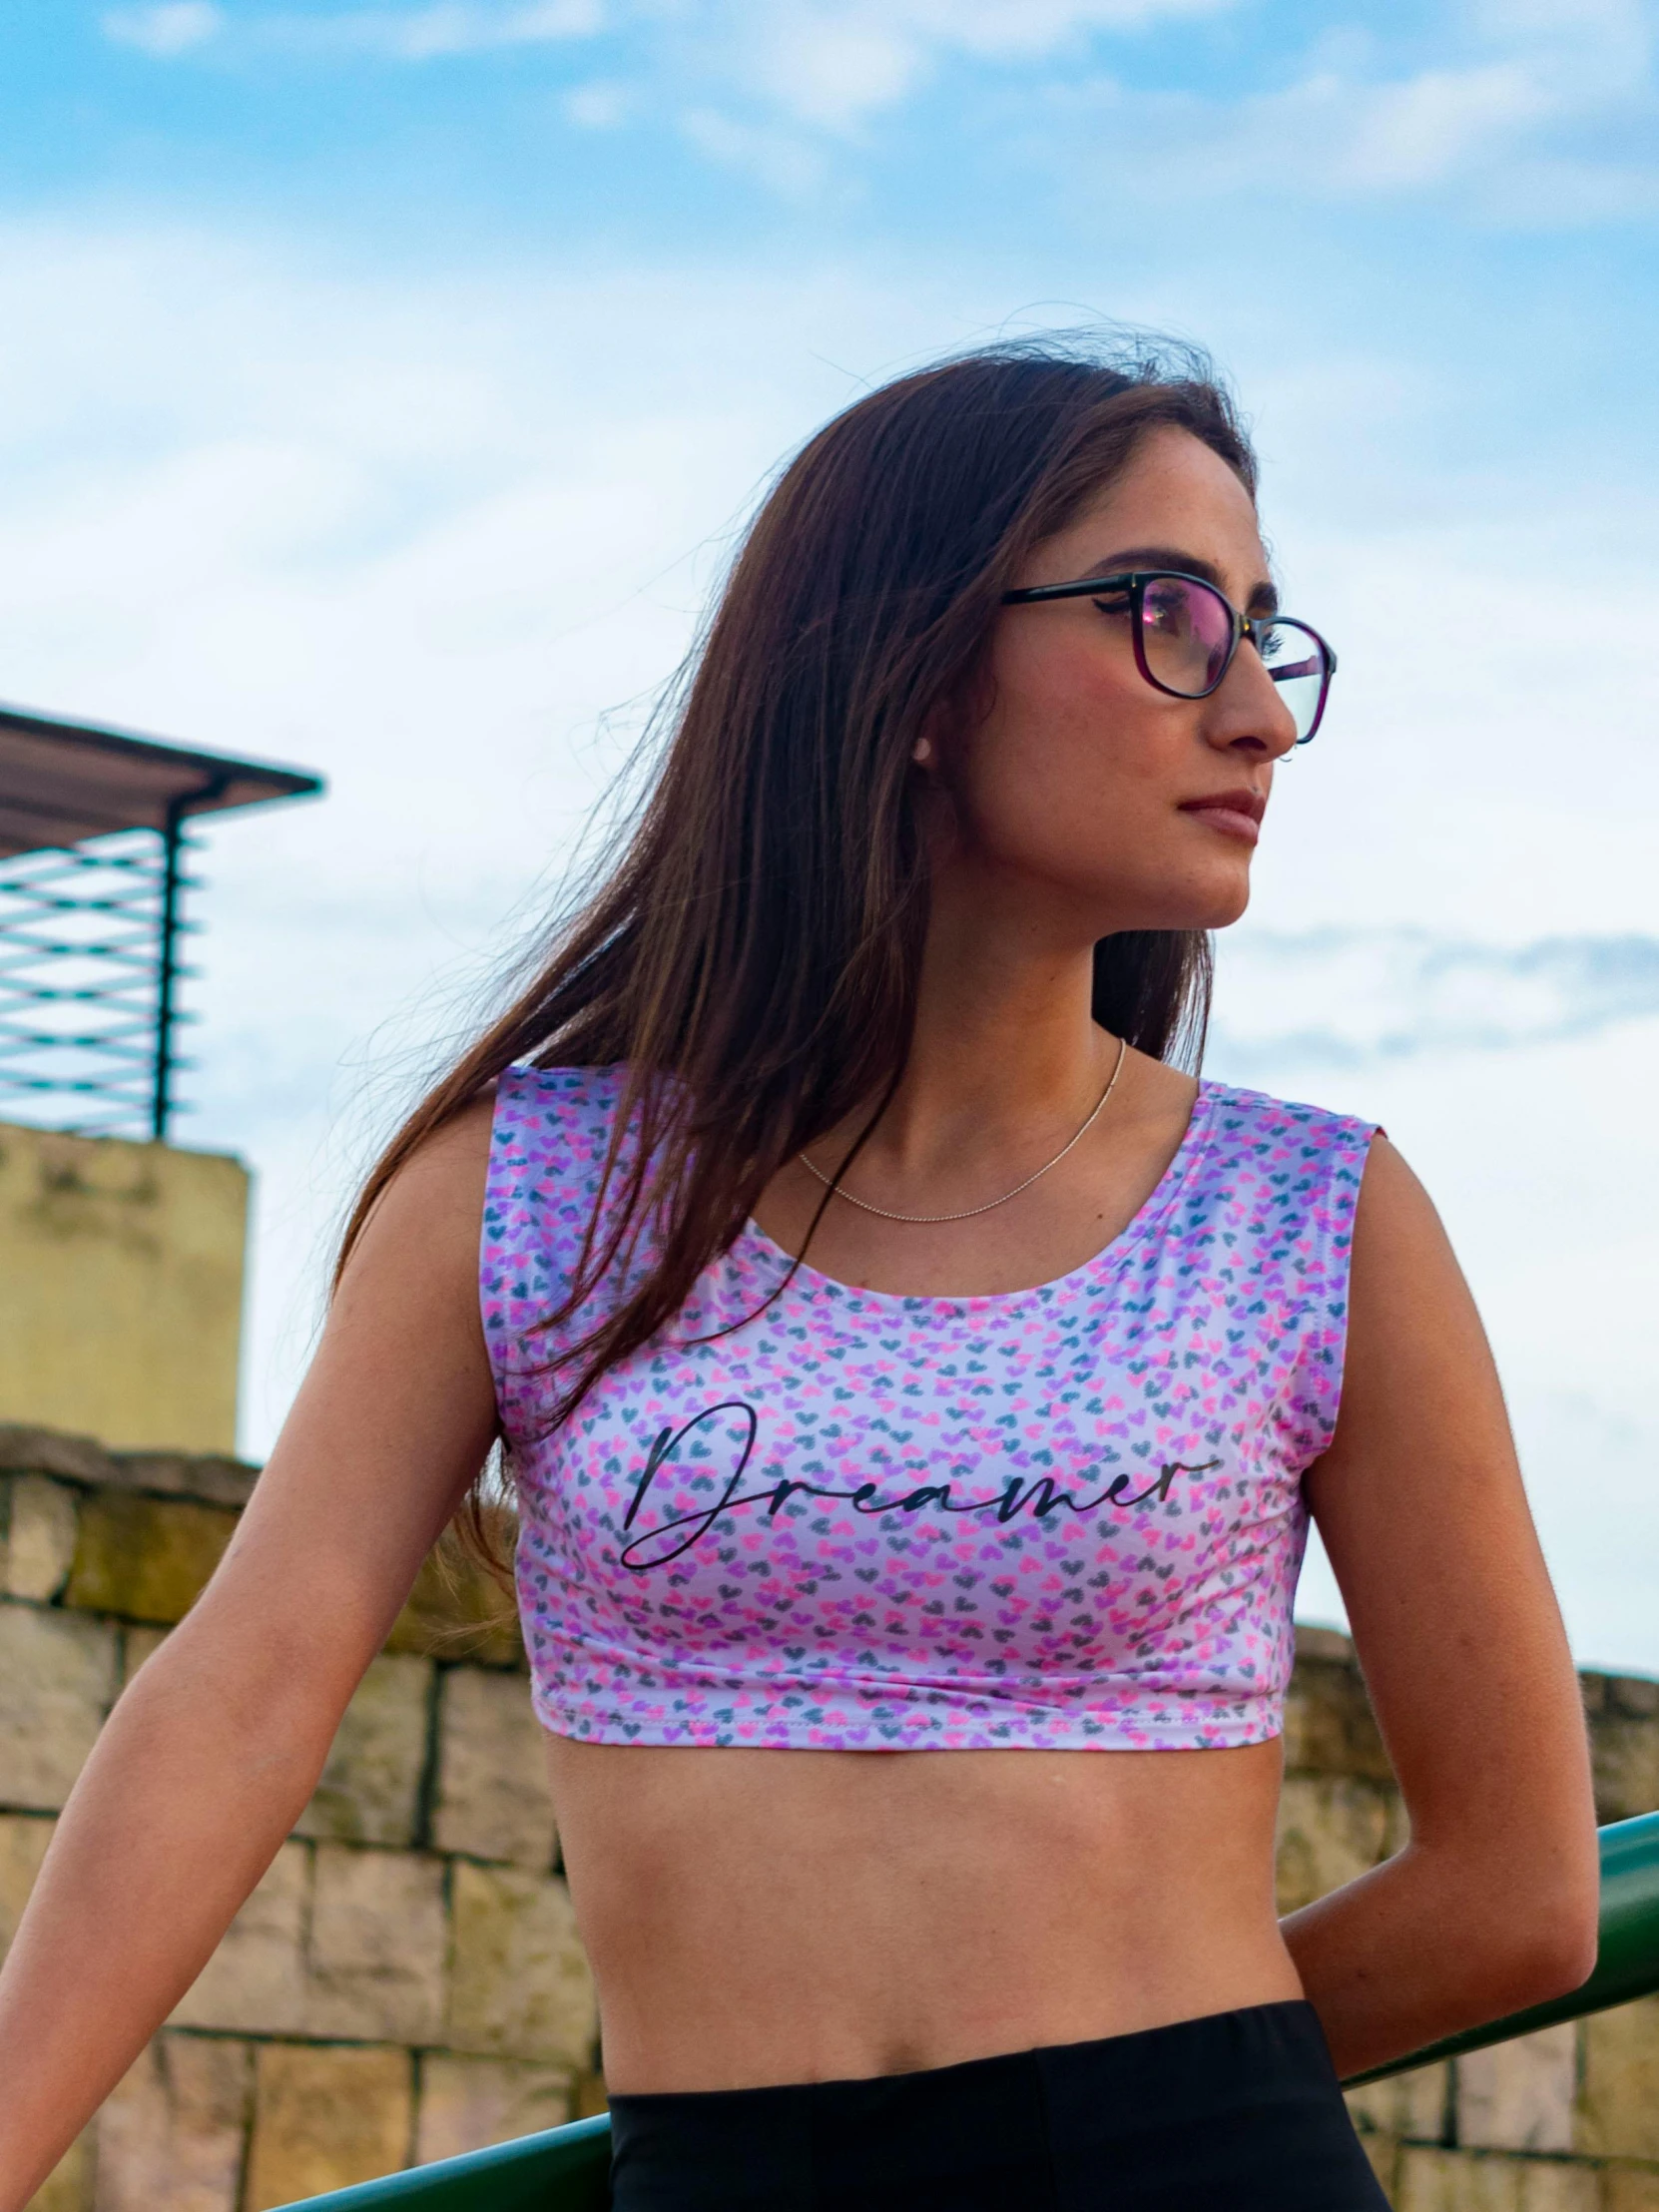 a woman with glasses and a crop top posing